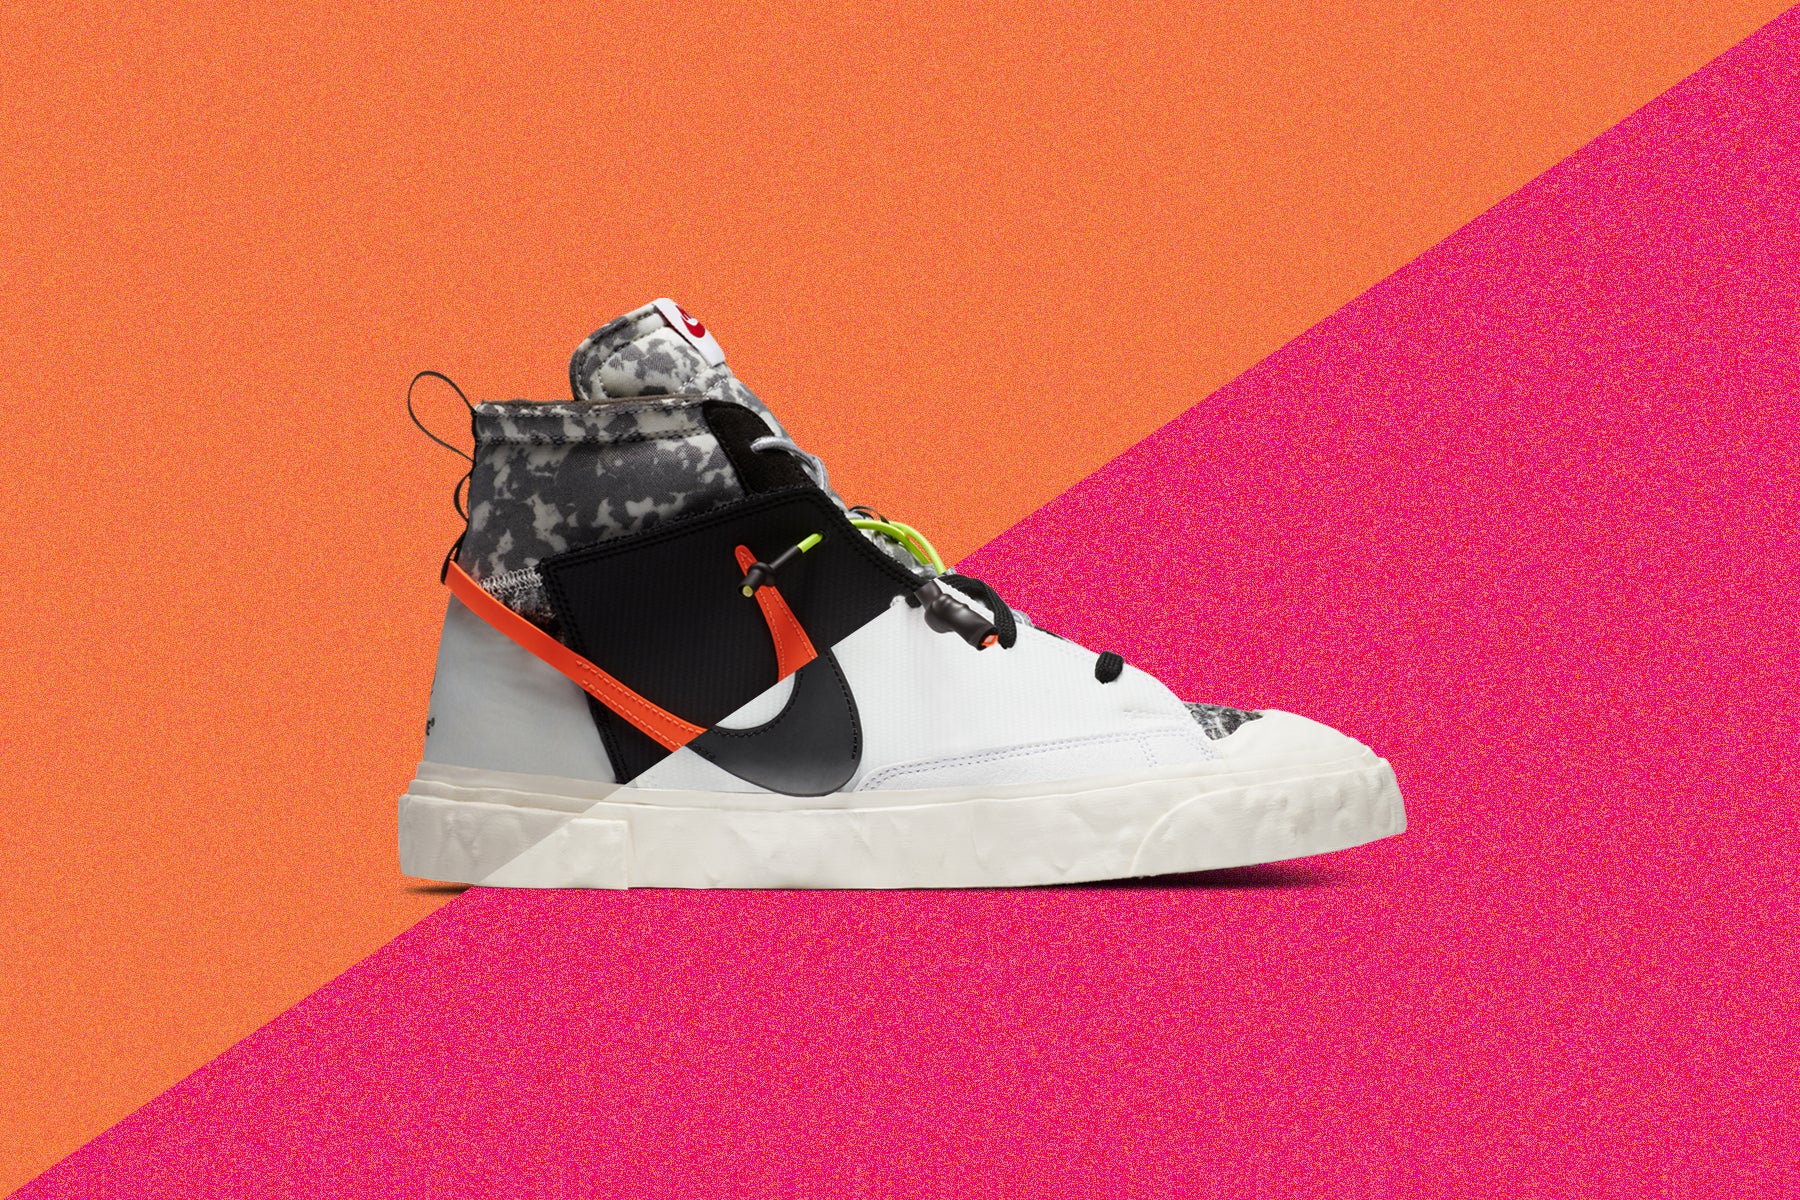 READYMADE x Nike Blazer Mid Releases February 27th – Feature